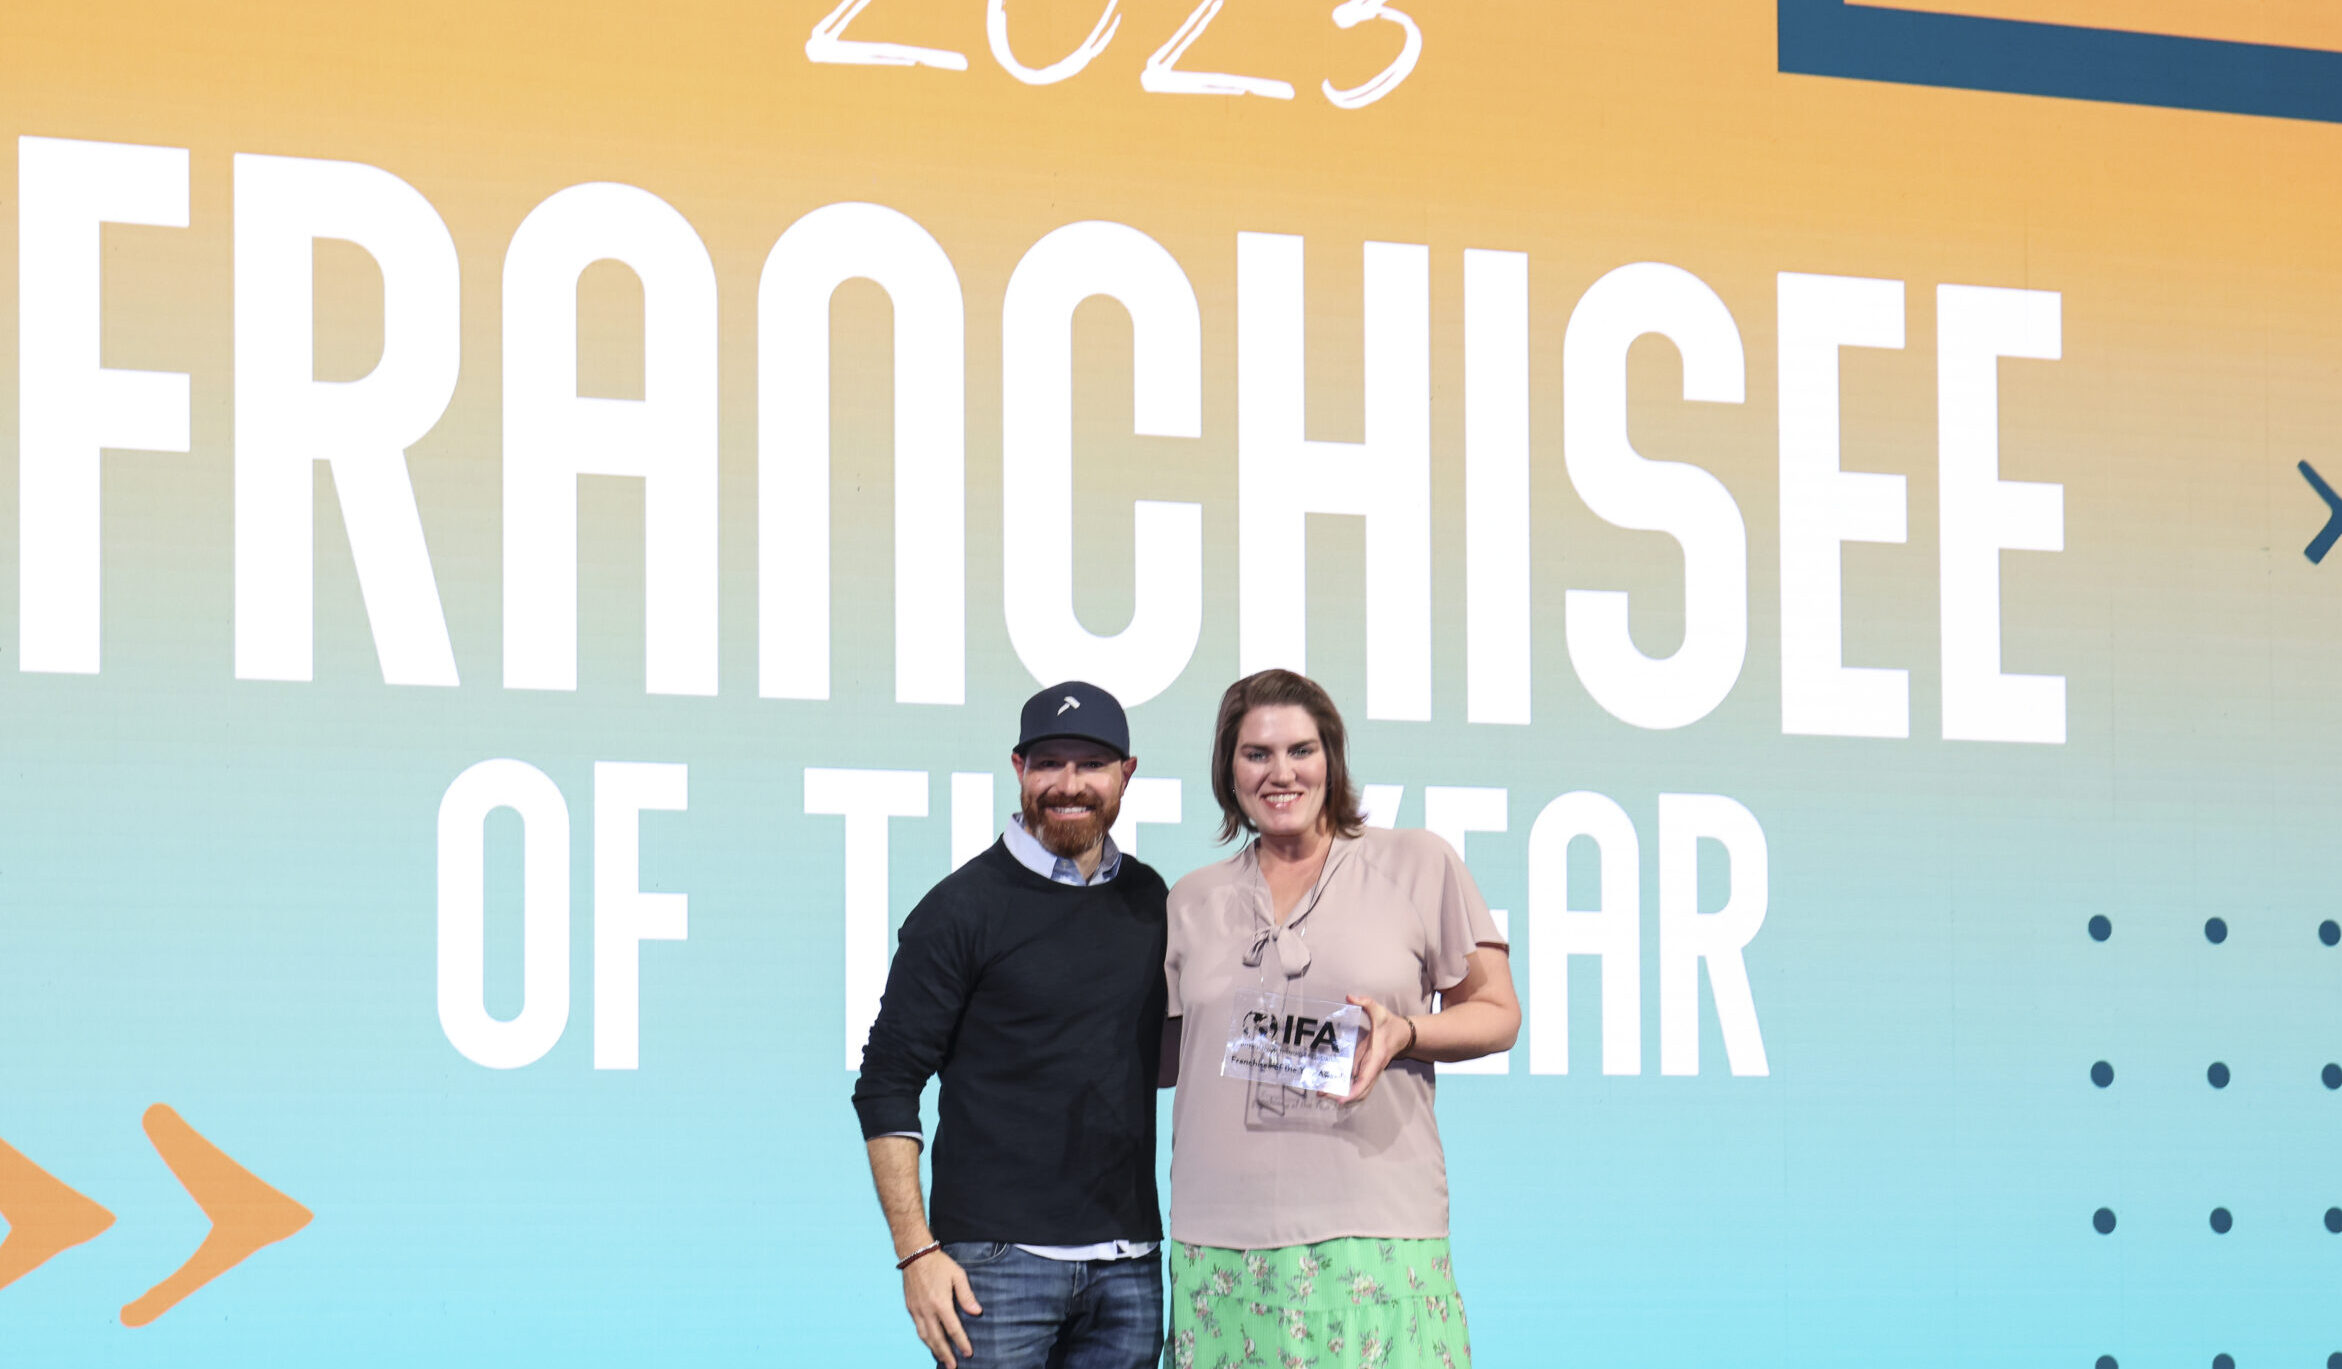 2023 Franchisee of the Year Award Katie Edge of Renovation Sells San Antonio and Michael Valente